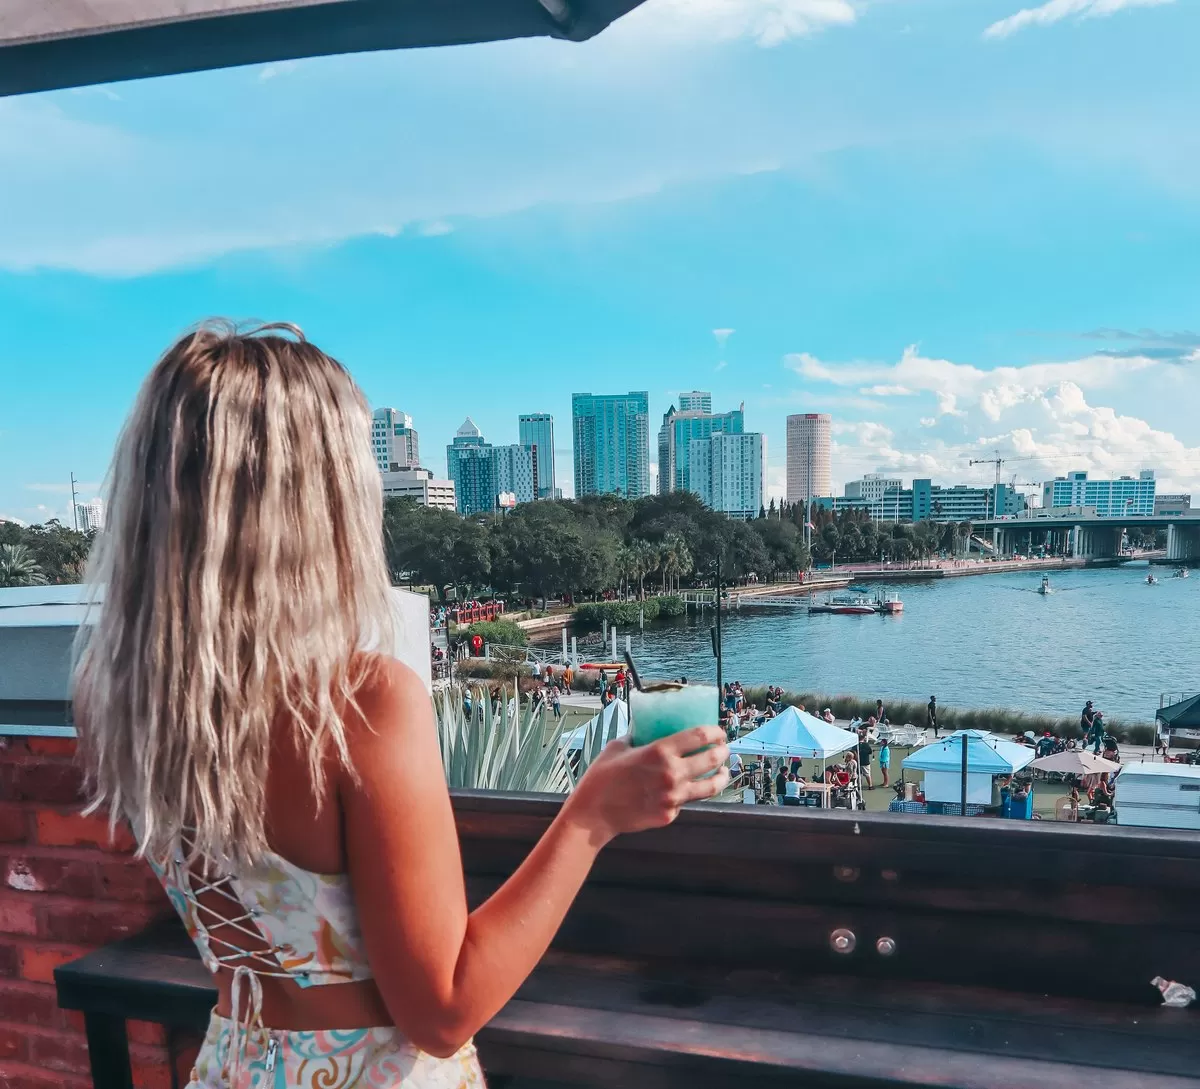 Destiny Snyder looking at the Tampa city skyline